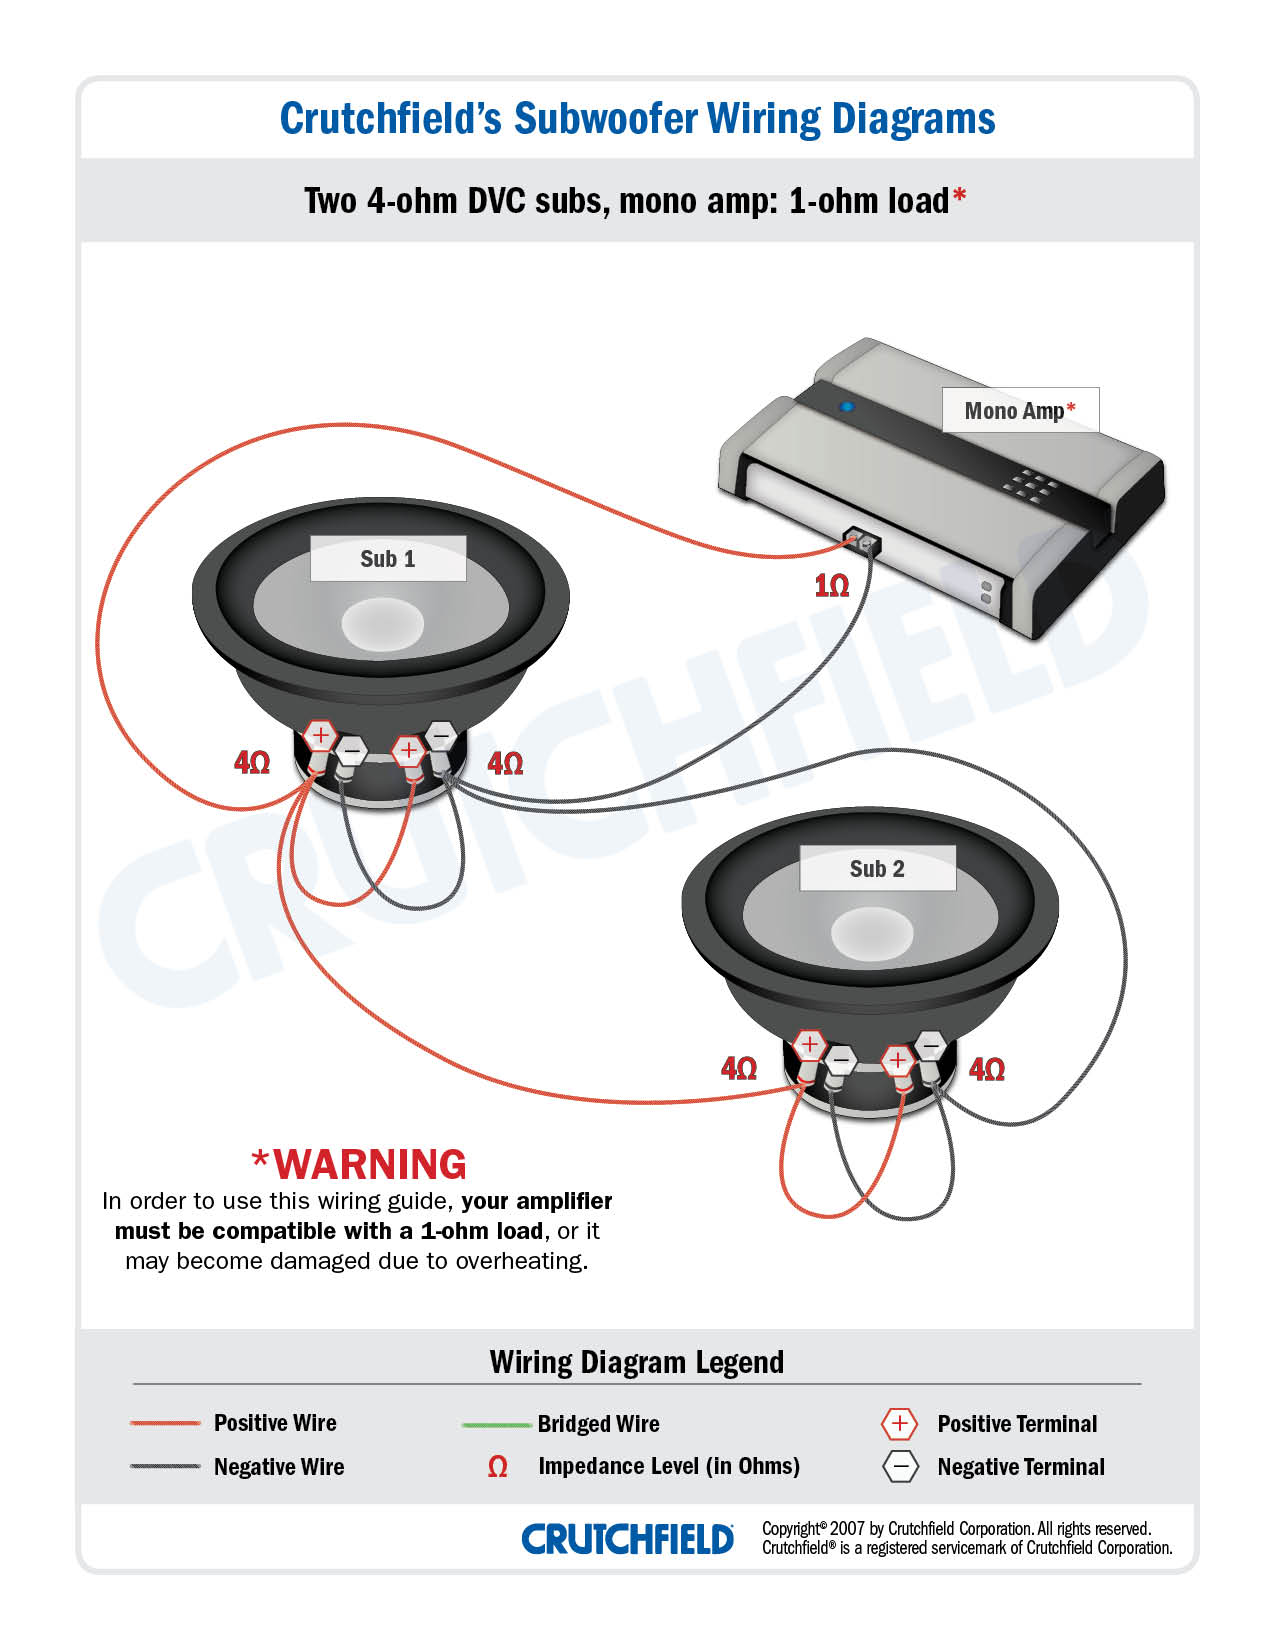 Wiring 3 single voice coil 4 ohm subs